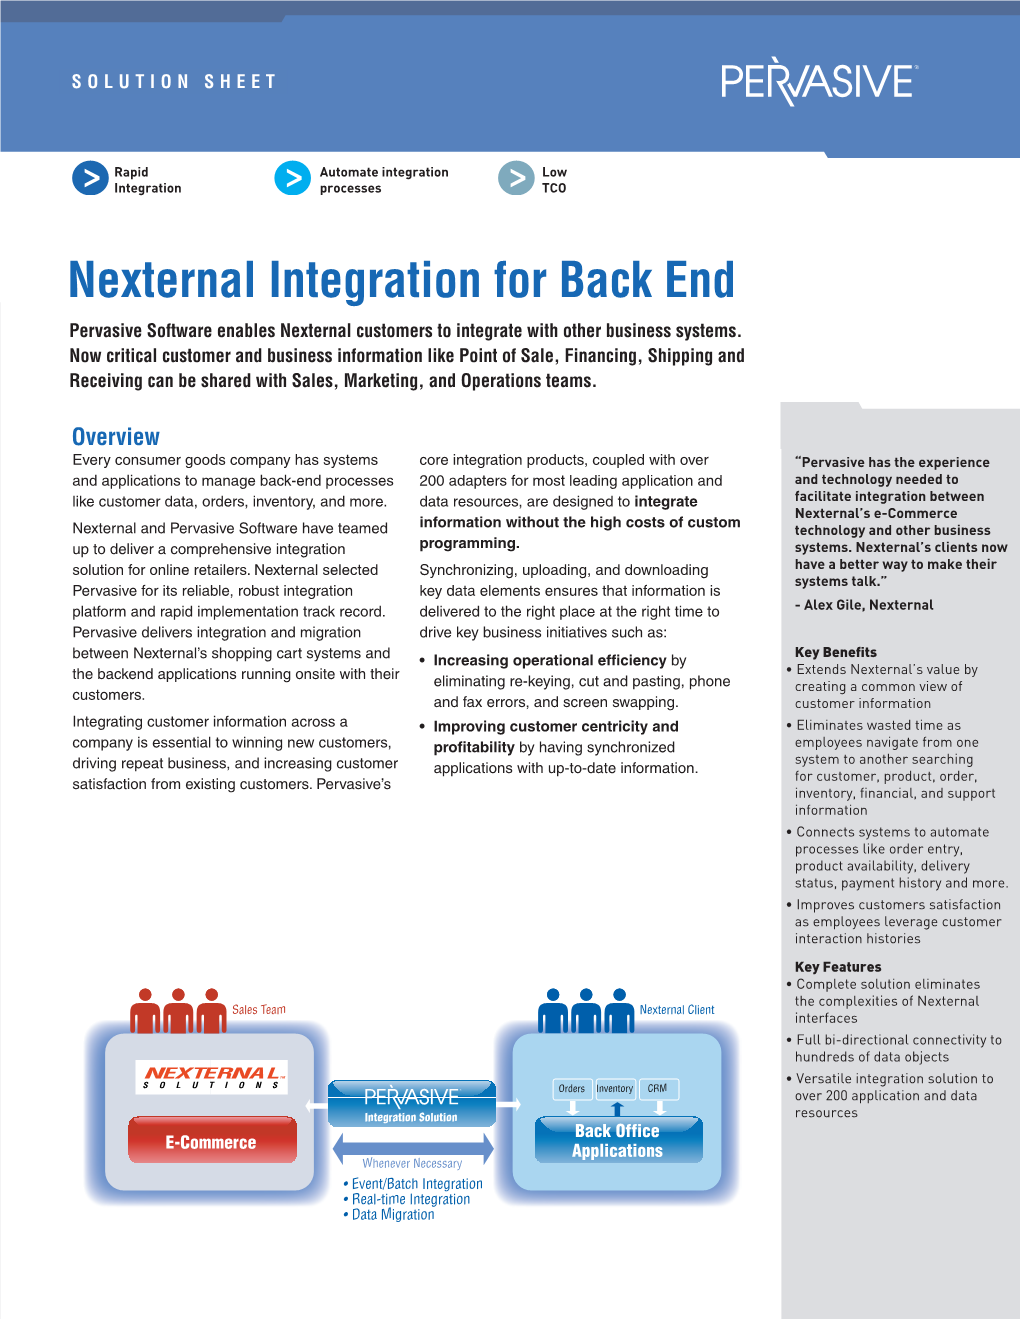 Nexternal Integration for Back End Pervasive Software Enables Nexternal Customers to Integrate with Other Business Systems